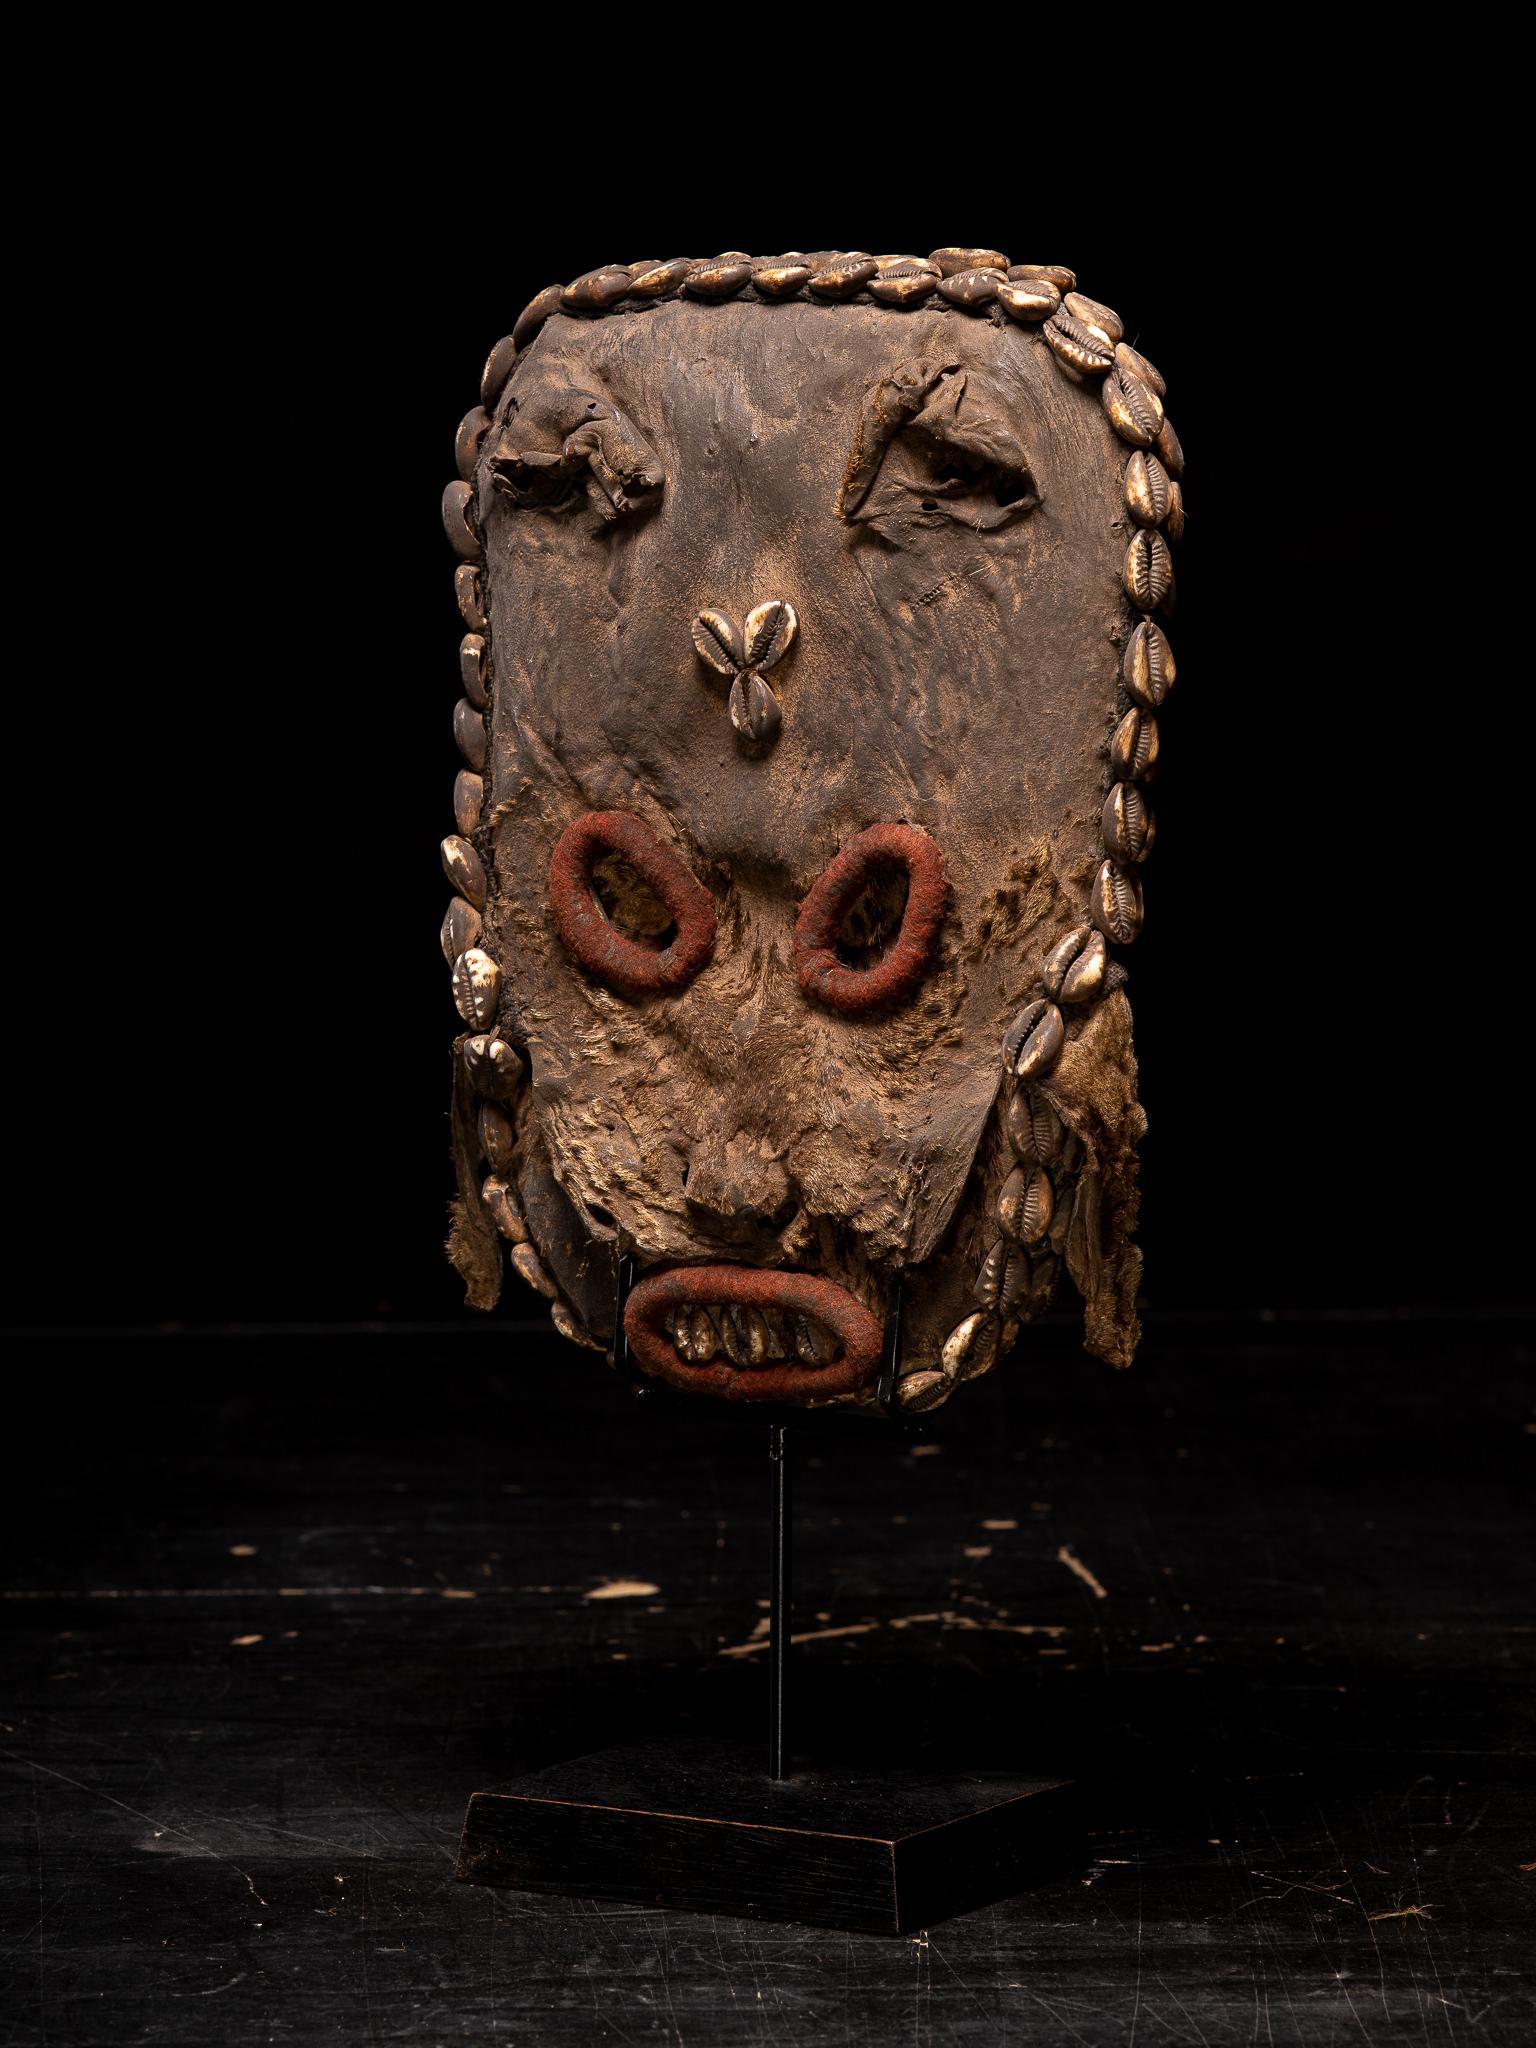 Decorative Grassland Leopard skin Mask

Private collection Brussels 

The raffia splint is covered with cloth and colourful miniature glass beads in various forms and sizes .The embroidery is arranged in geometrical patterns and motifs representing